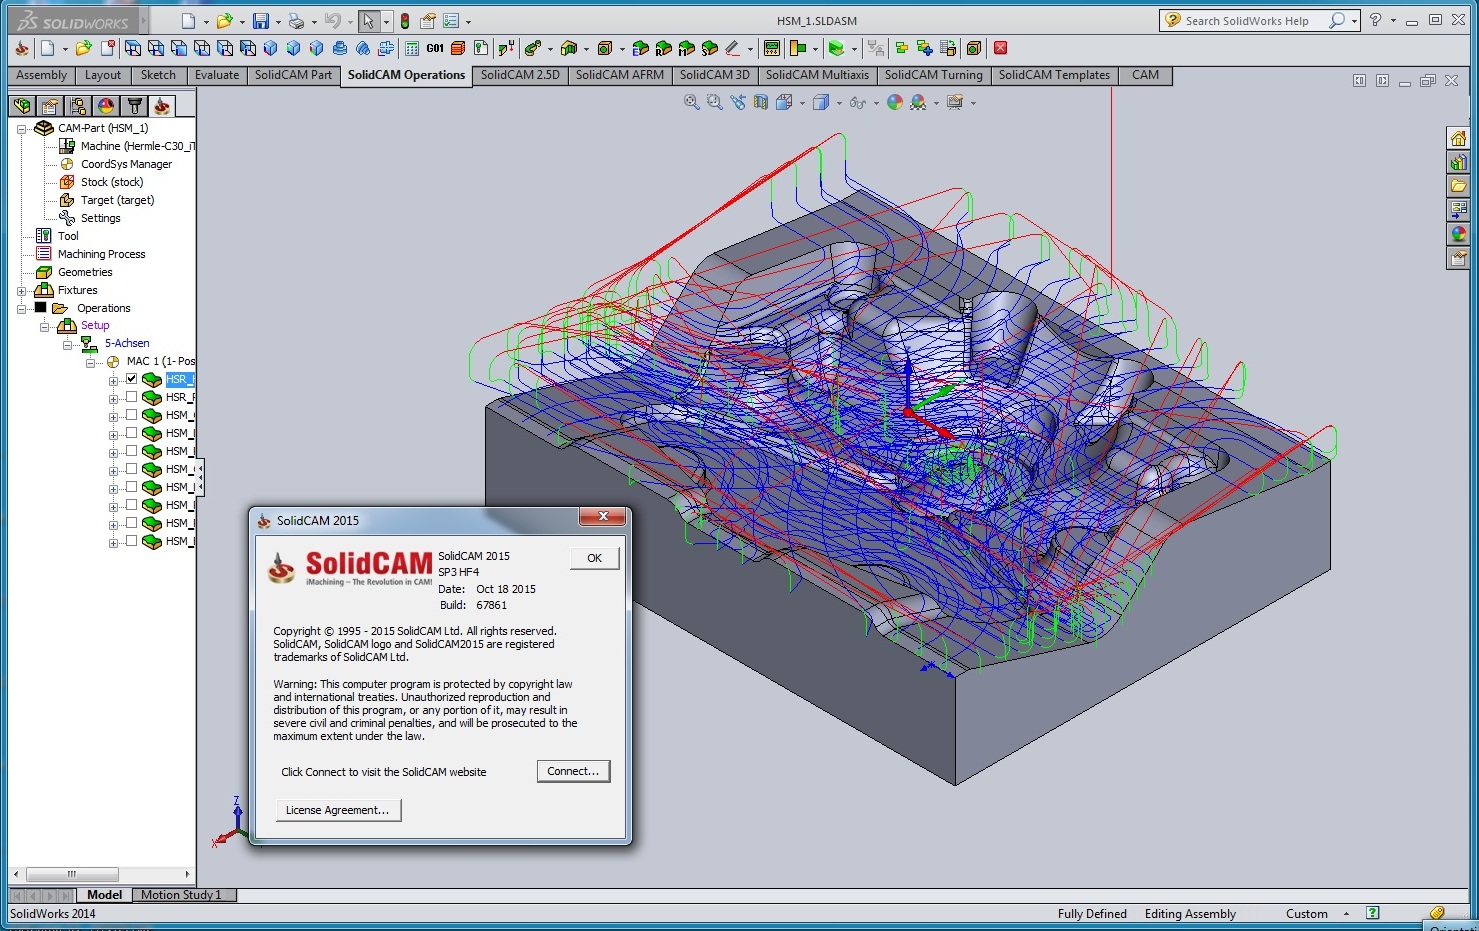 solidworks 2012 free download full version with crack 32 bit